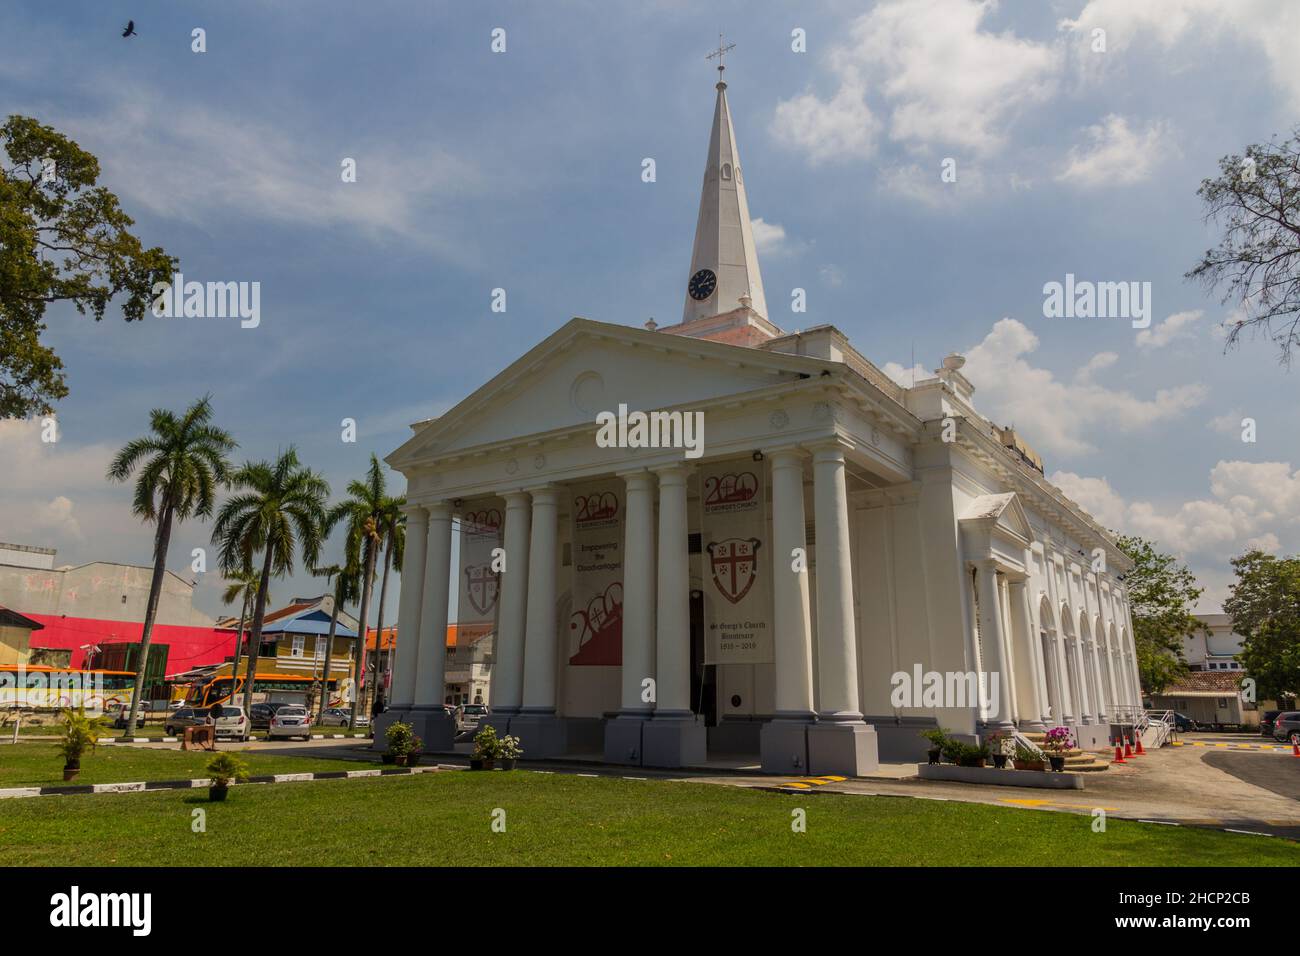 GEORGE STADT, MALAYSIA - 20. MÄRZ 2018: St. George's Anglican Church in George Town, Malaysia Stockfoto